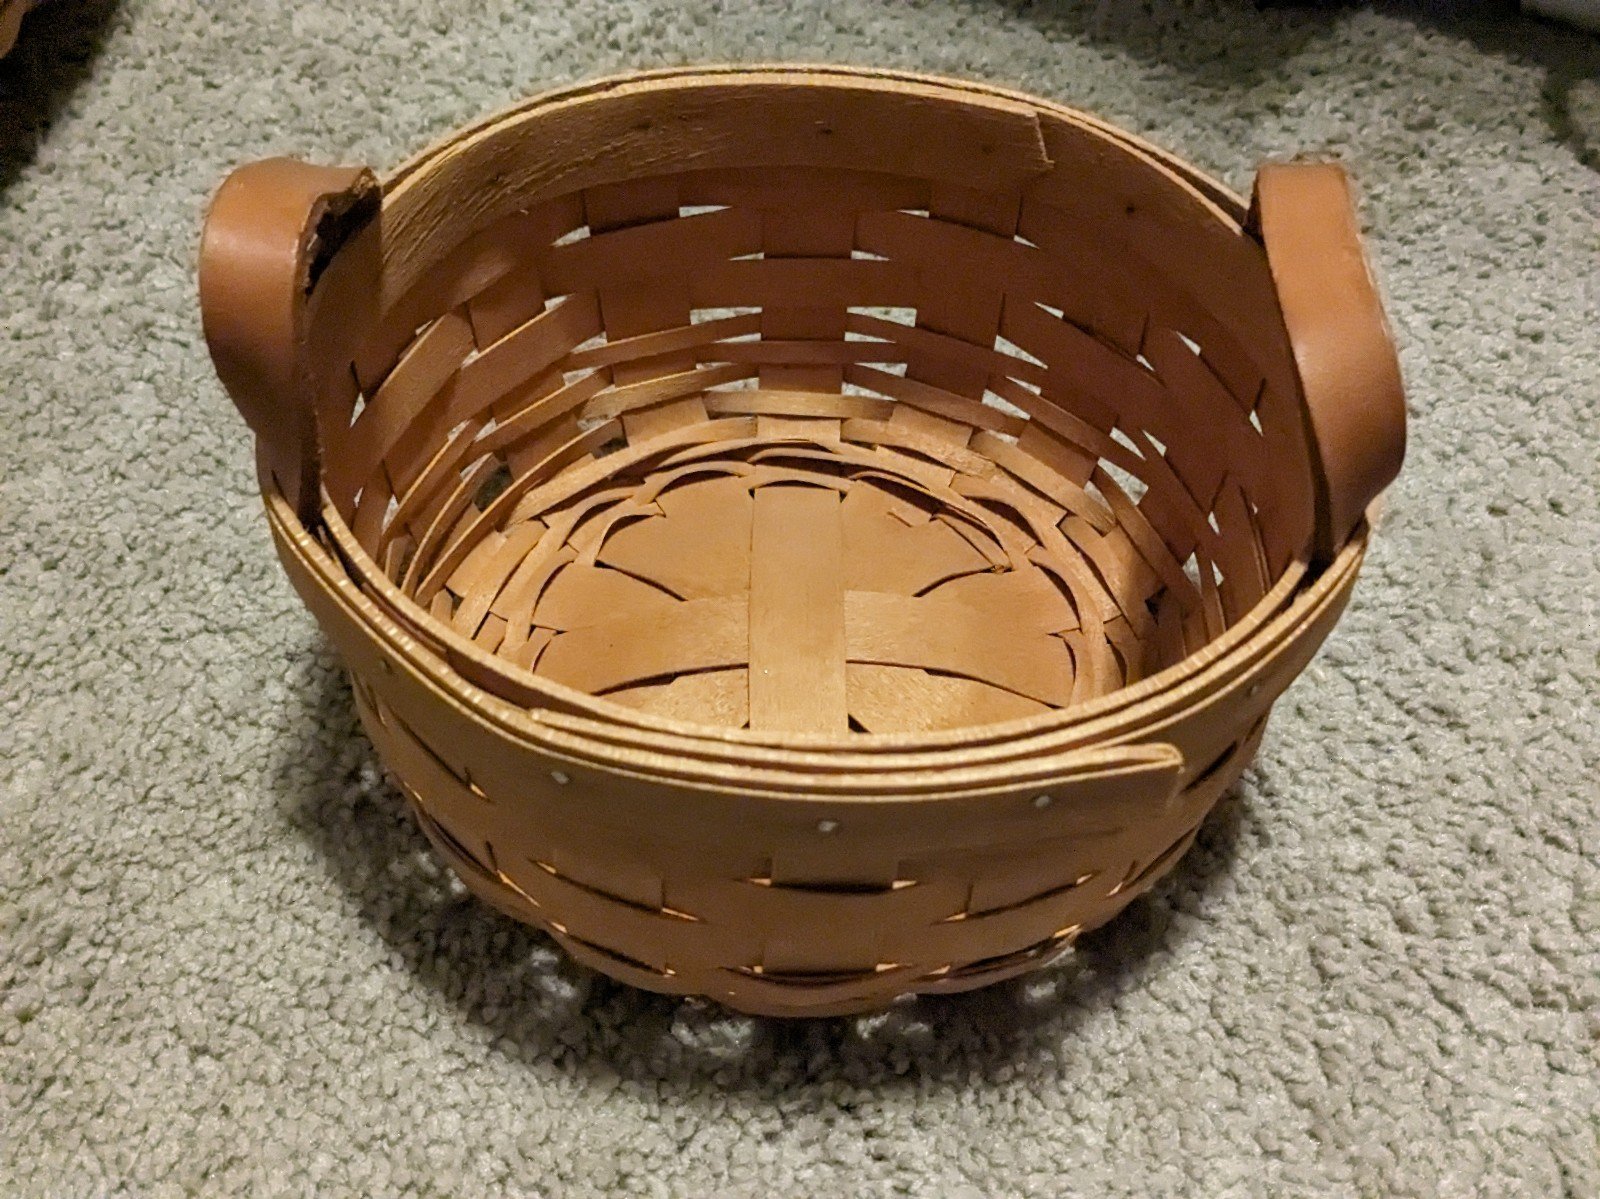 LONGABERGER BASKET SIGNED & DATED 2000 VINTAGE WITH LEATHER HANDLES CAAgwgZ9X